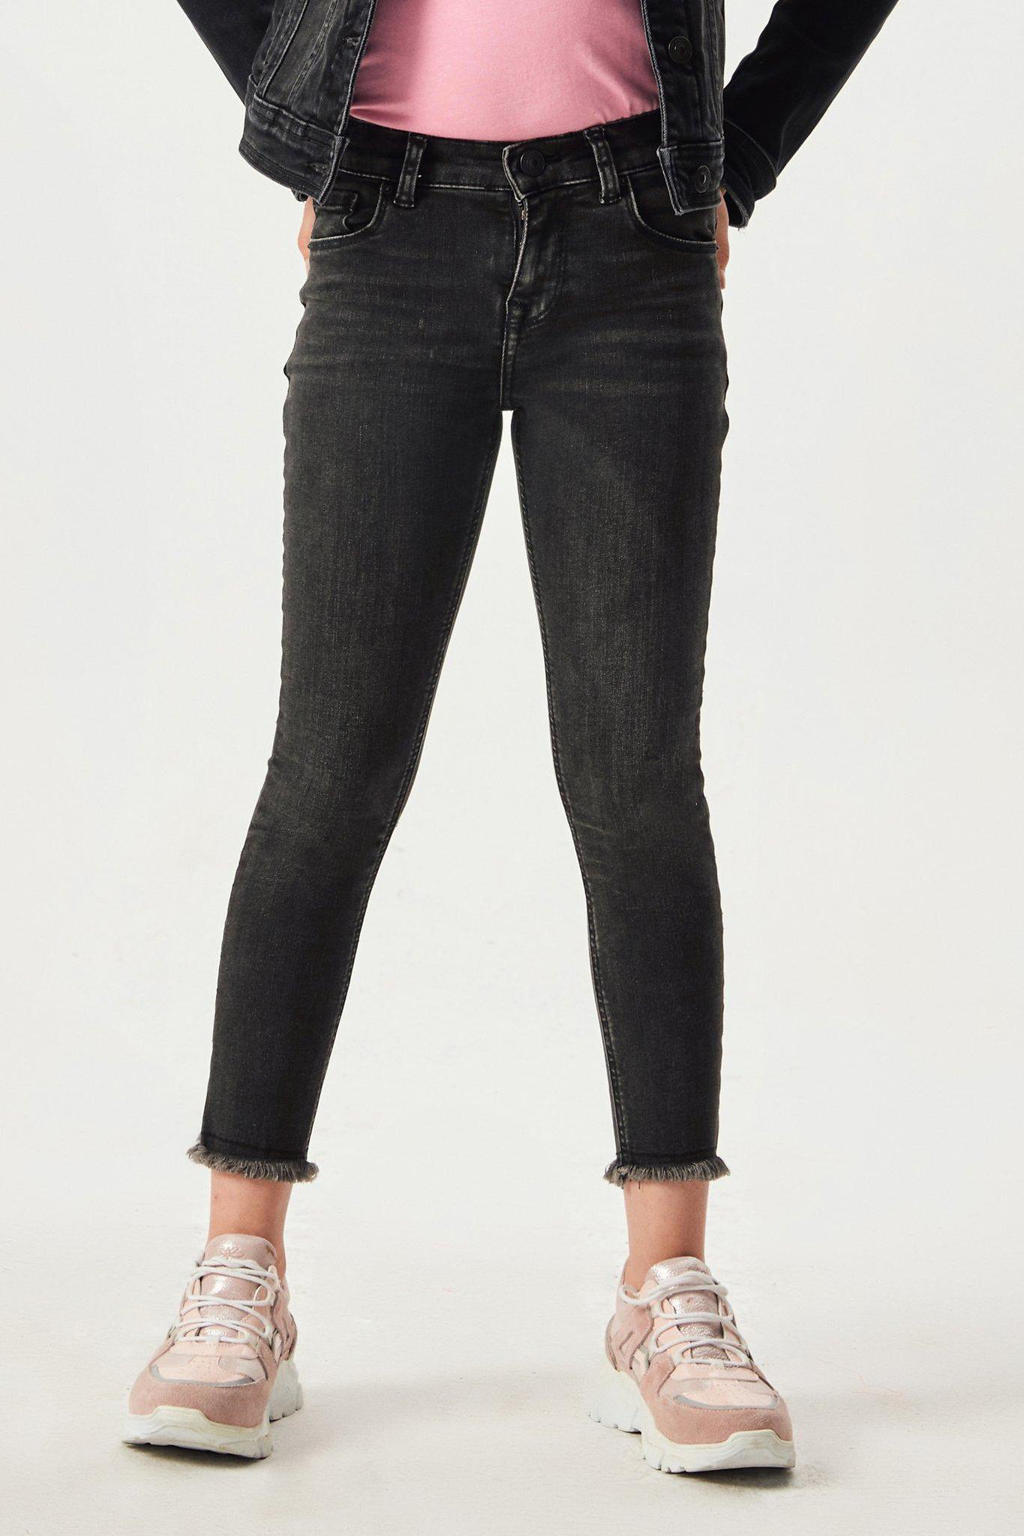 LTB cropped high waist skinny jeans Amy latore wash